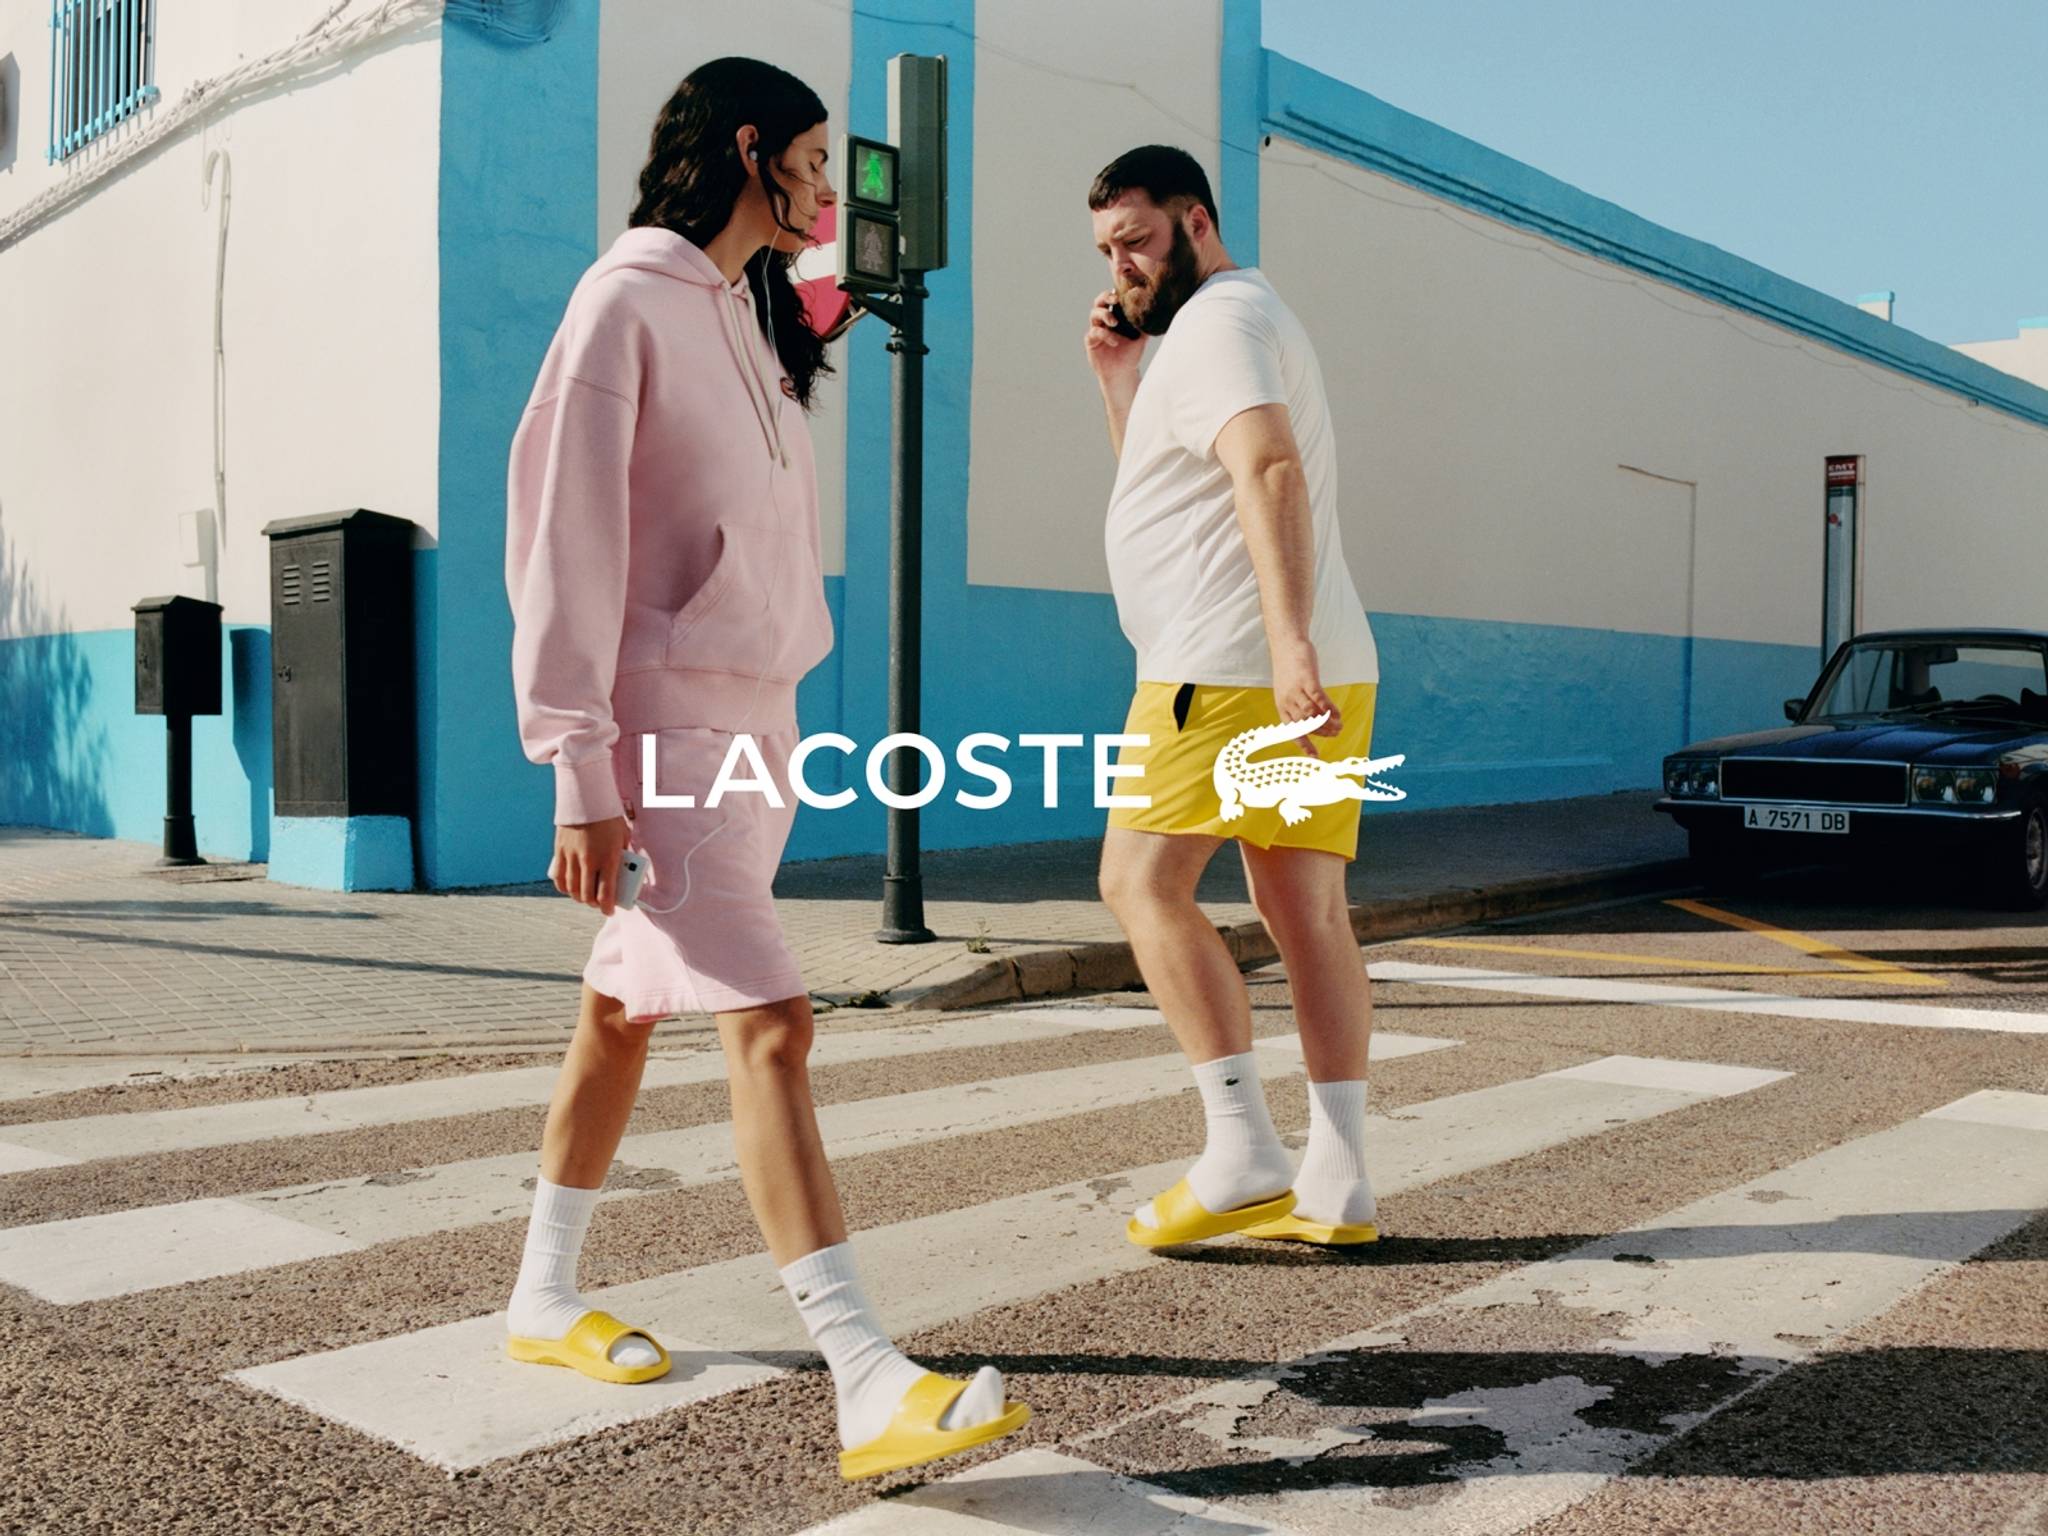 Lacoste speaks to representation with ageless campaign